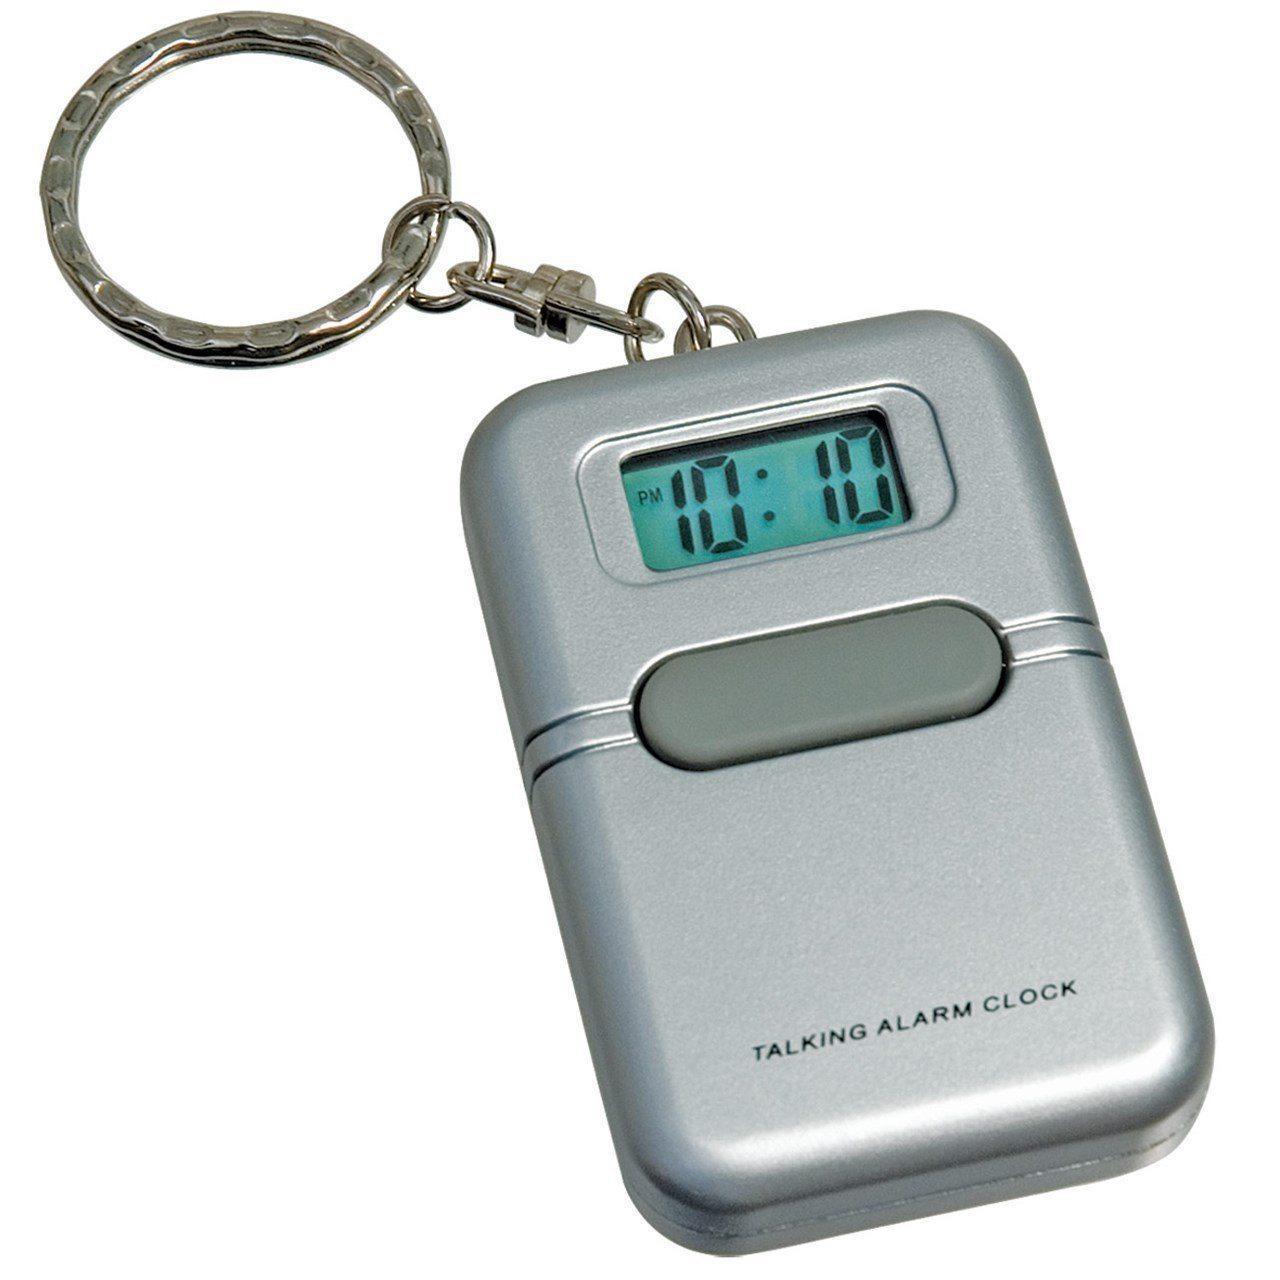 Tel-Time Talking Key Chain Square - The Low Vision Store